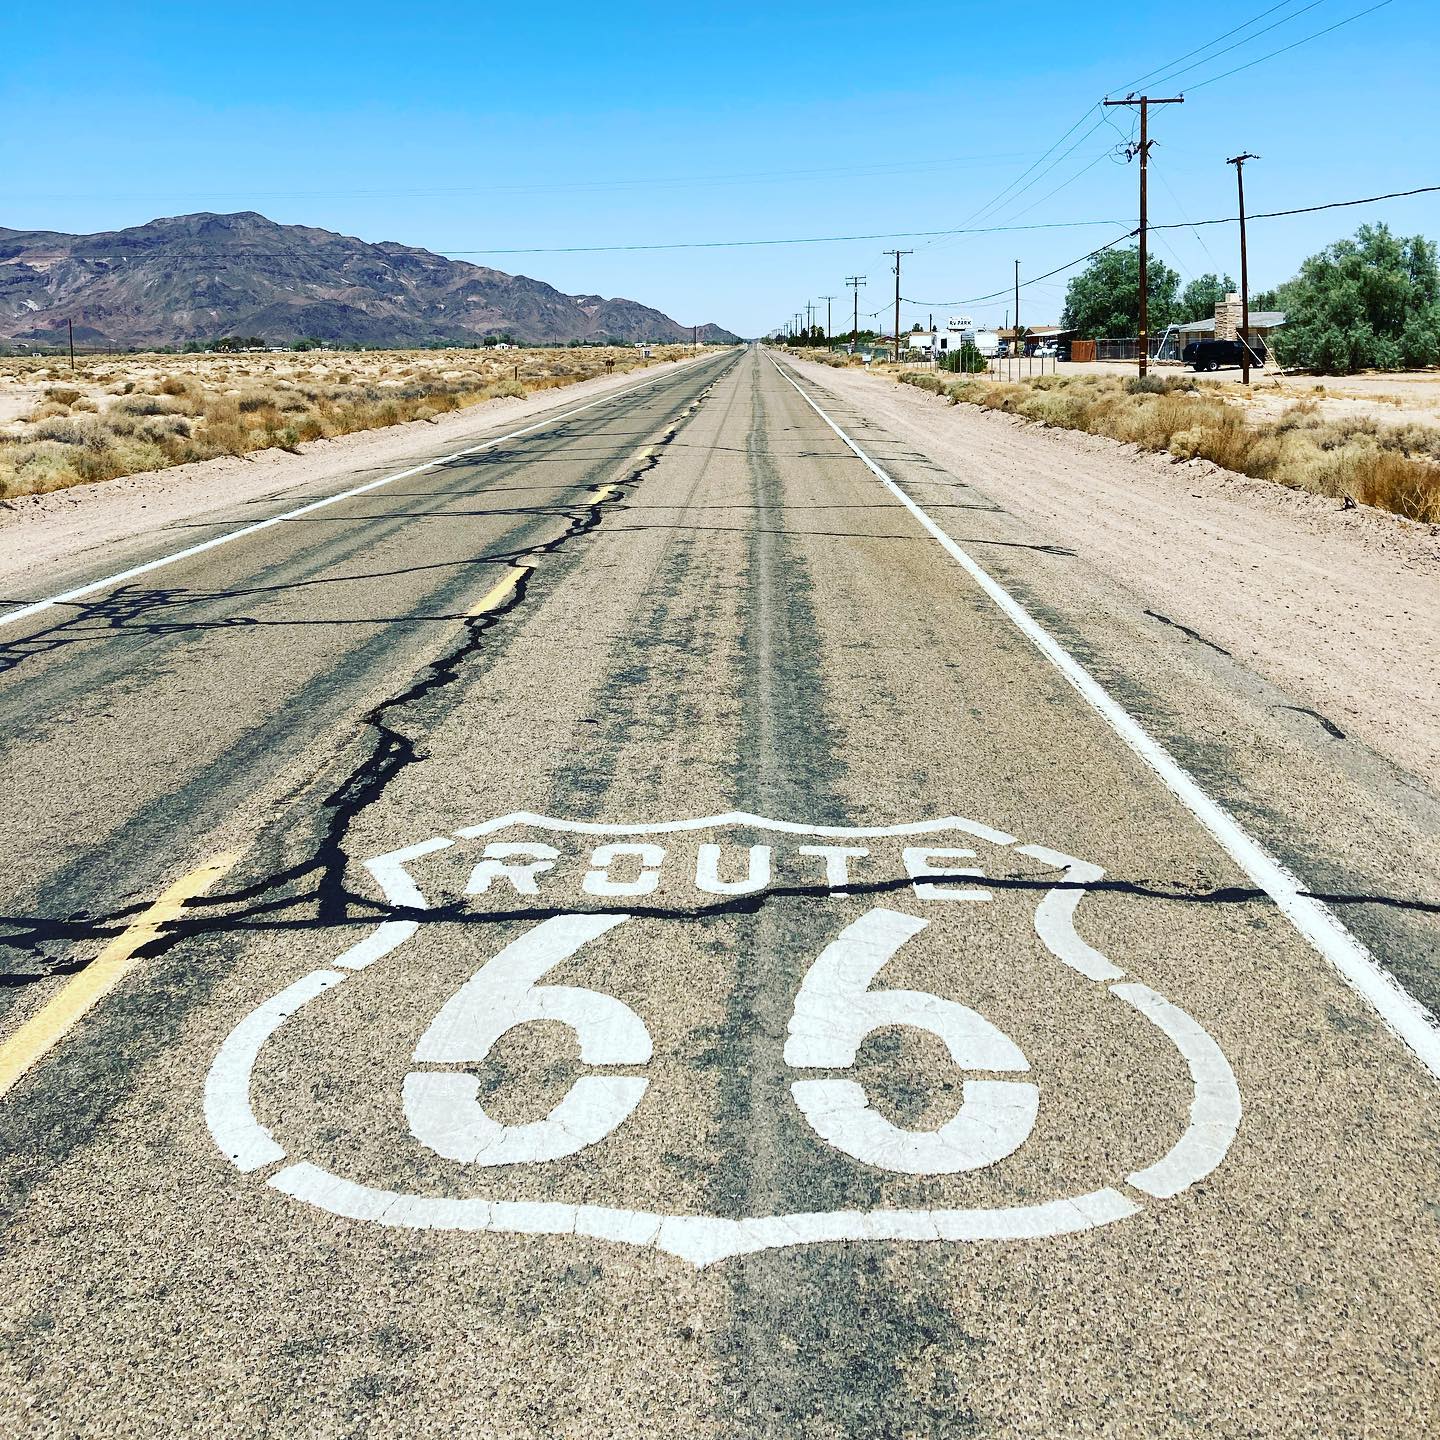 A road stretching into the distant horizon with the Route 66 symbol painted onto it. Photo by Instagram user @townofspectre